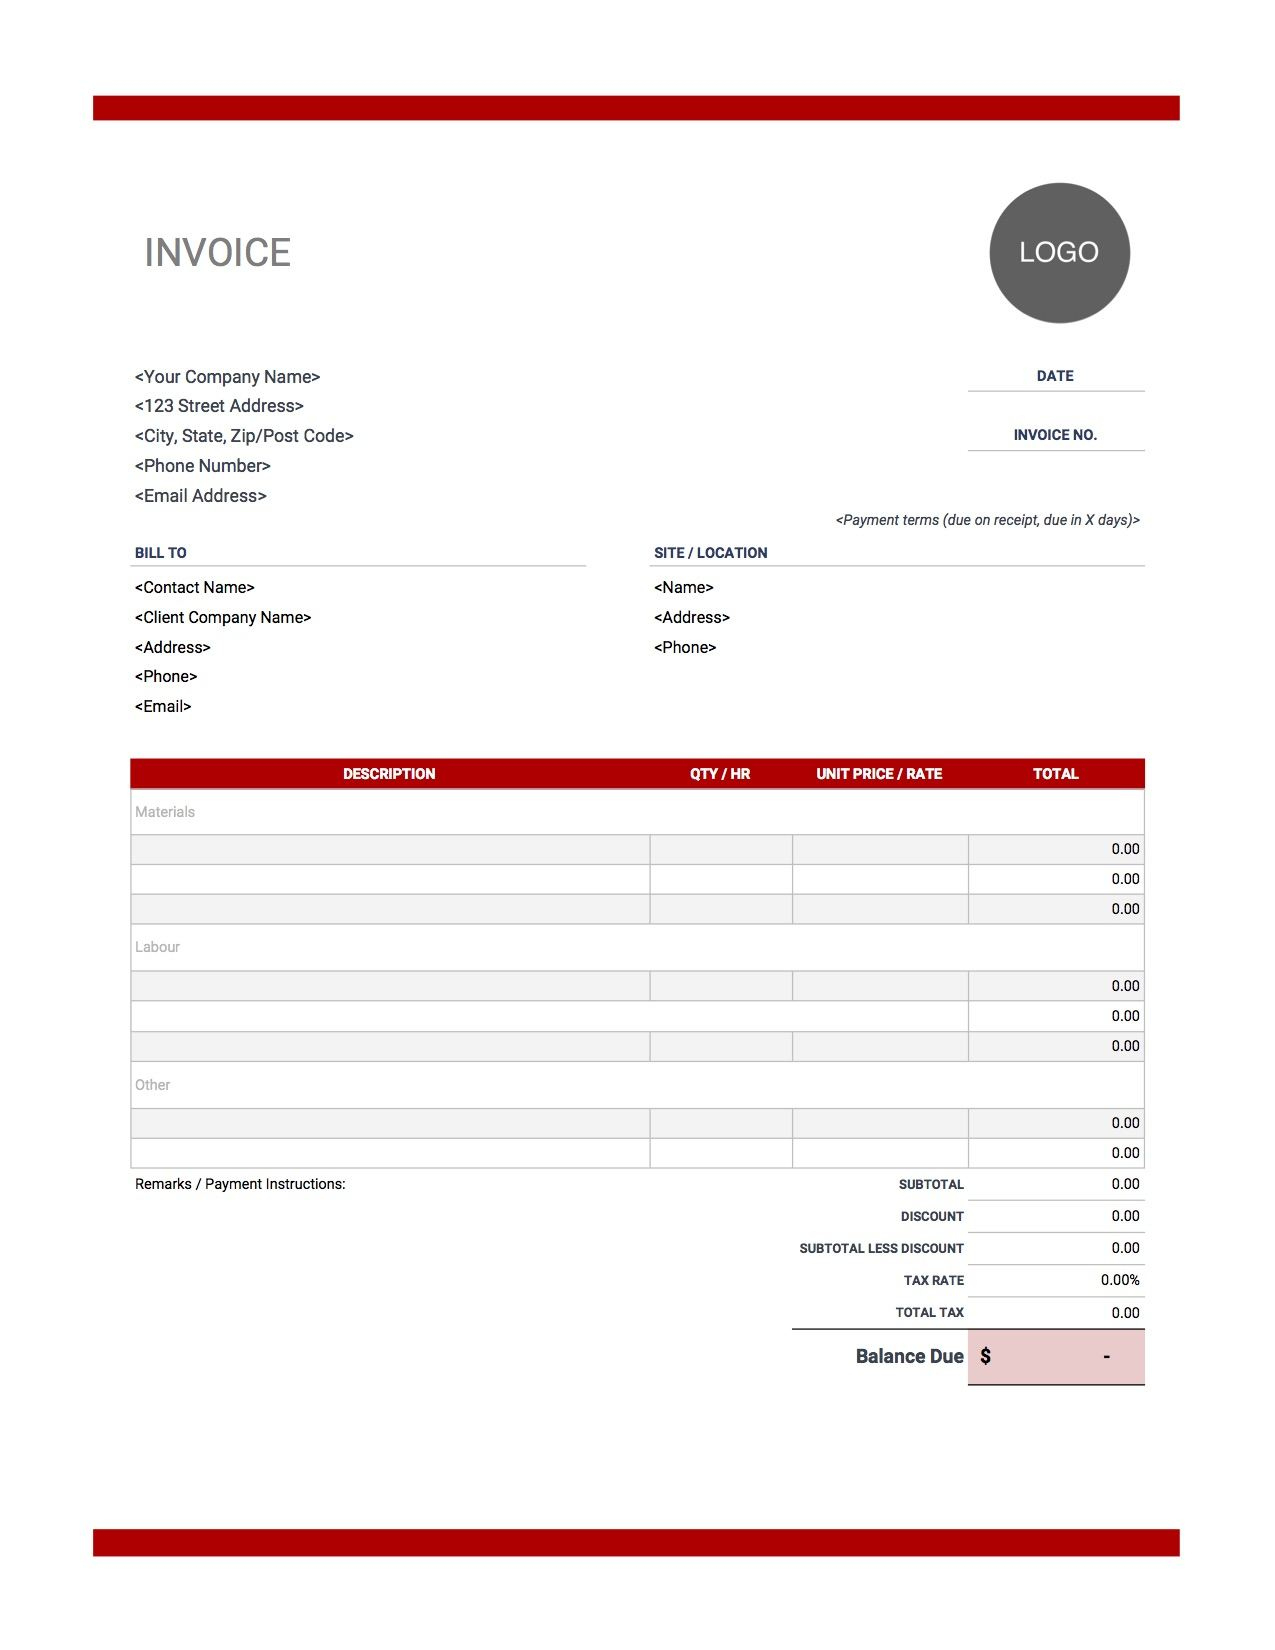 Contractor Invoice Templates | Free Download | Invoice Simple pertaining to Contractors Invoices Free Templates